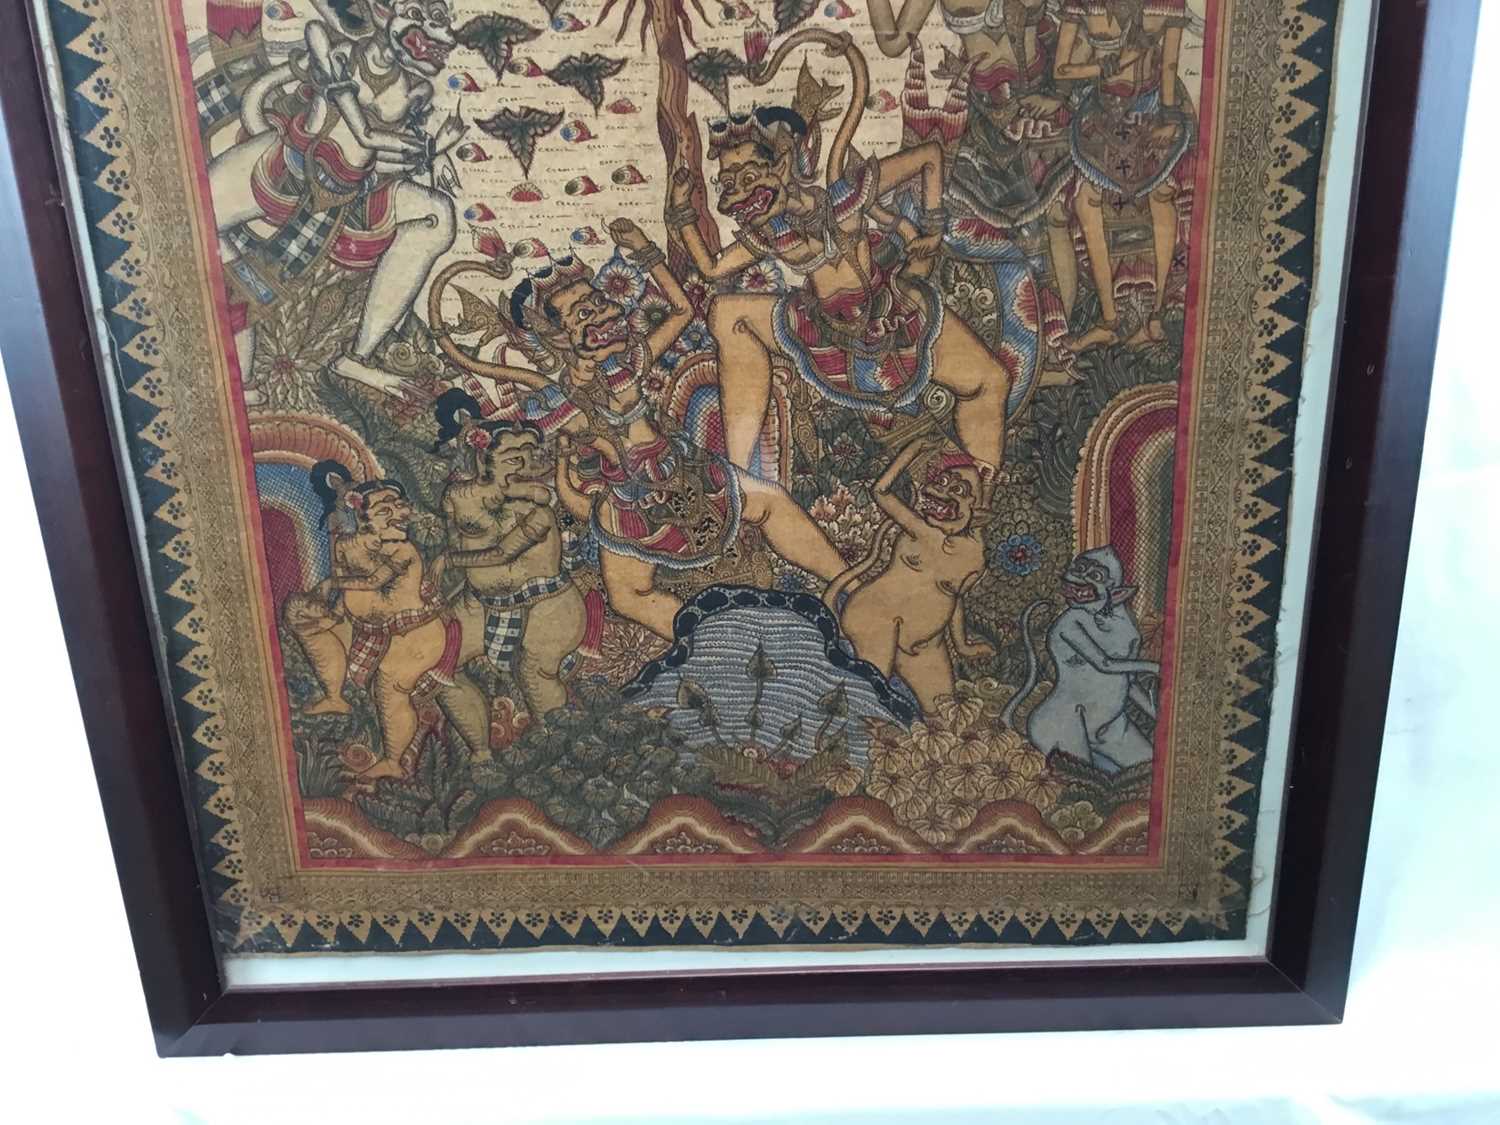 Balinese painting on cloth - 47cm x 63cm in temporary frame - Image 5 of 5